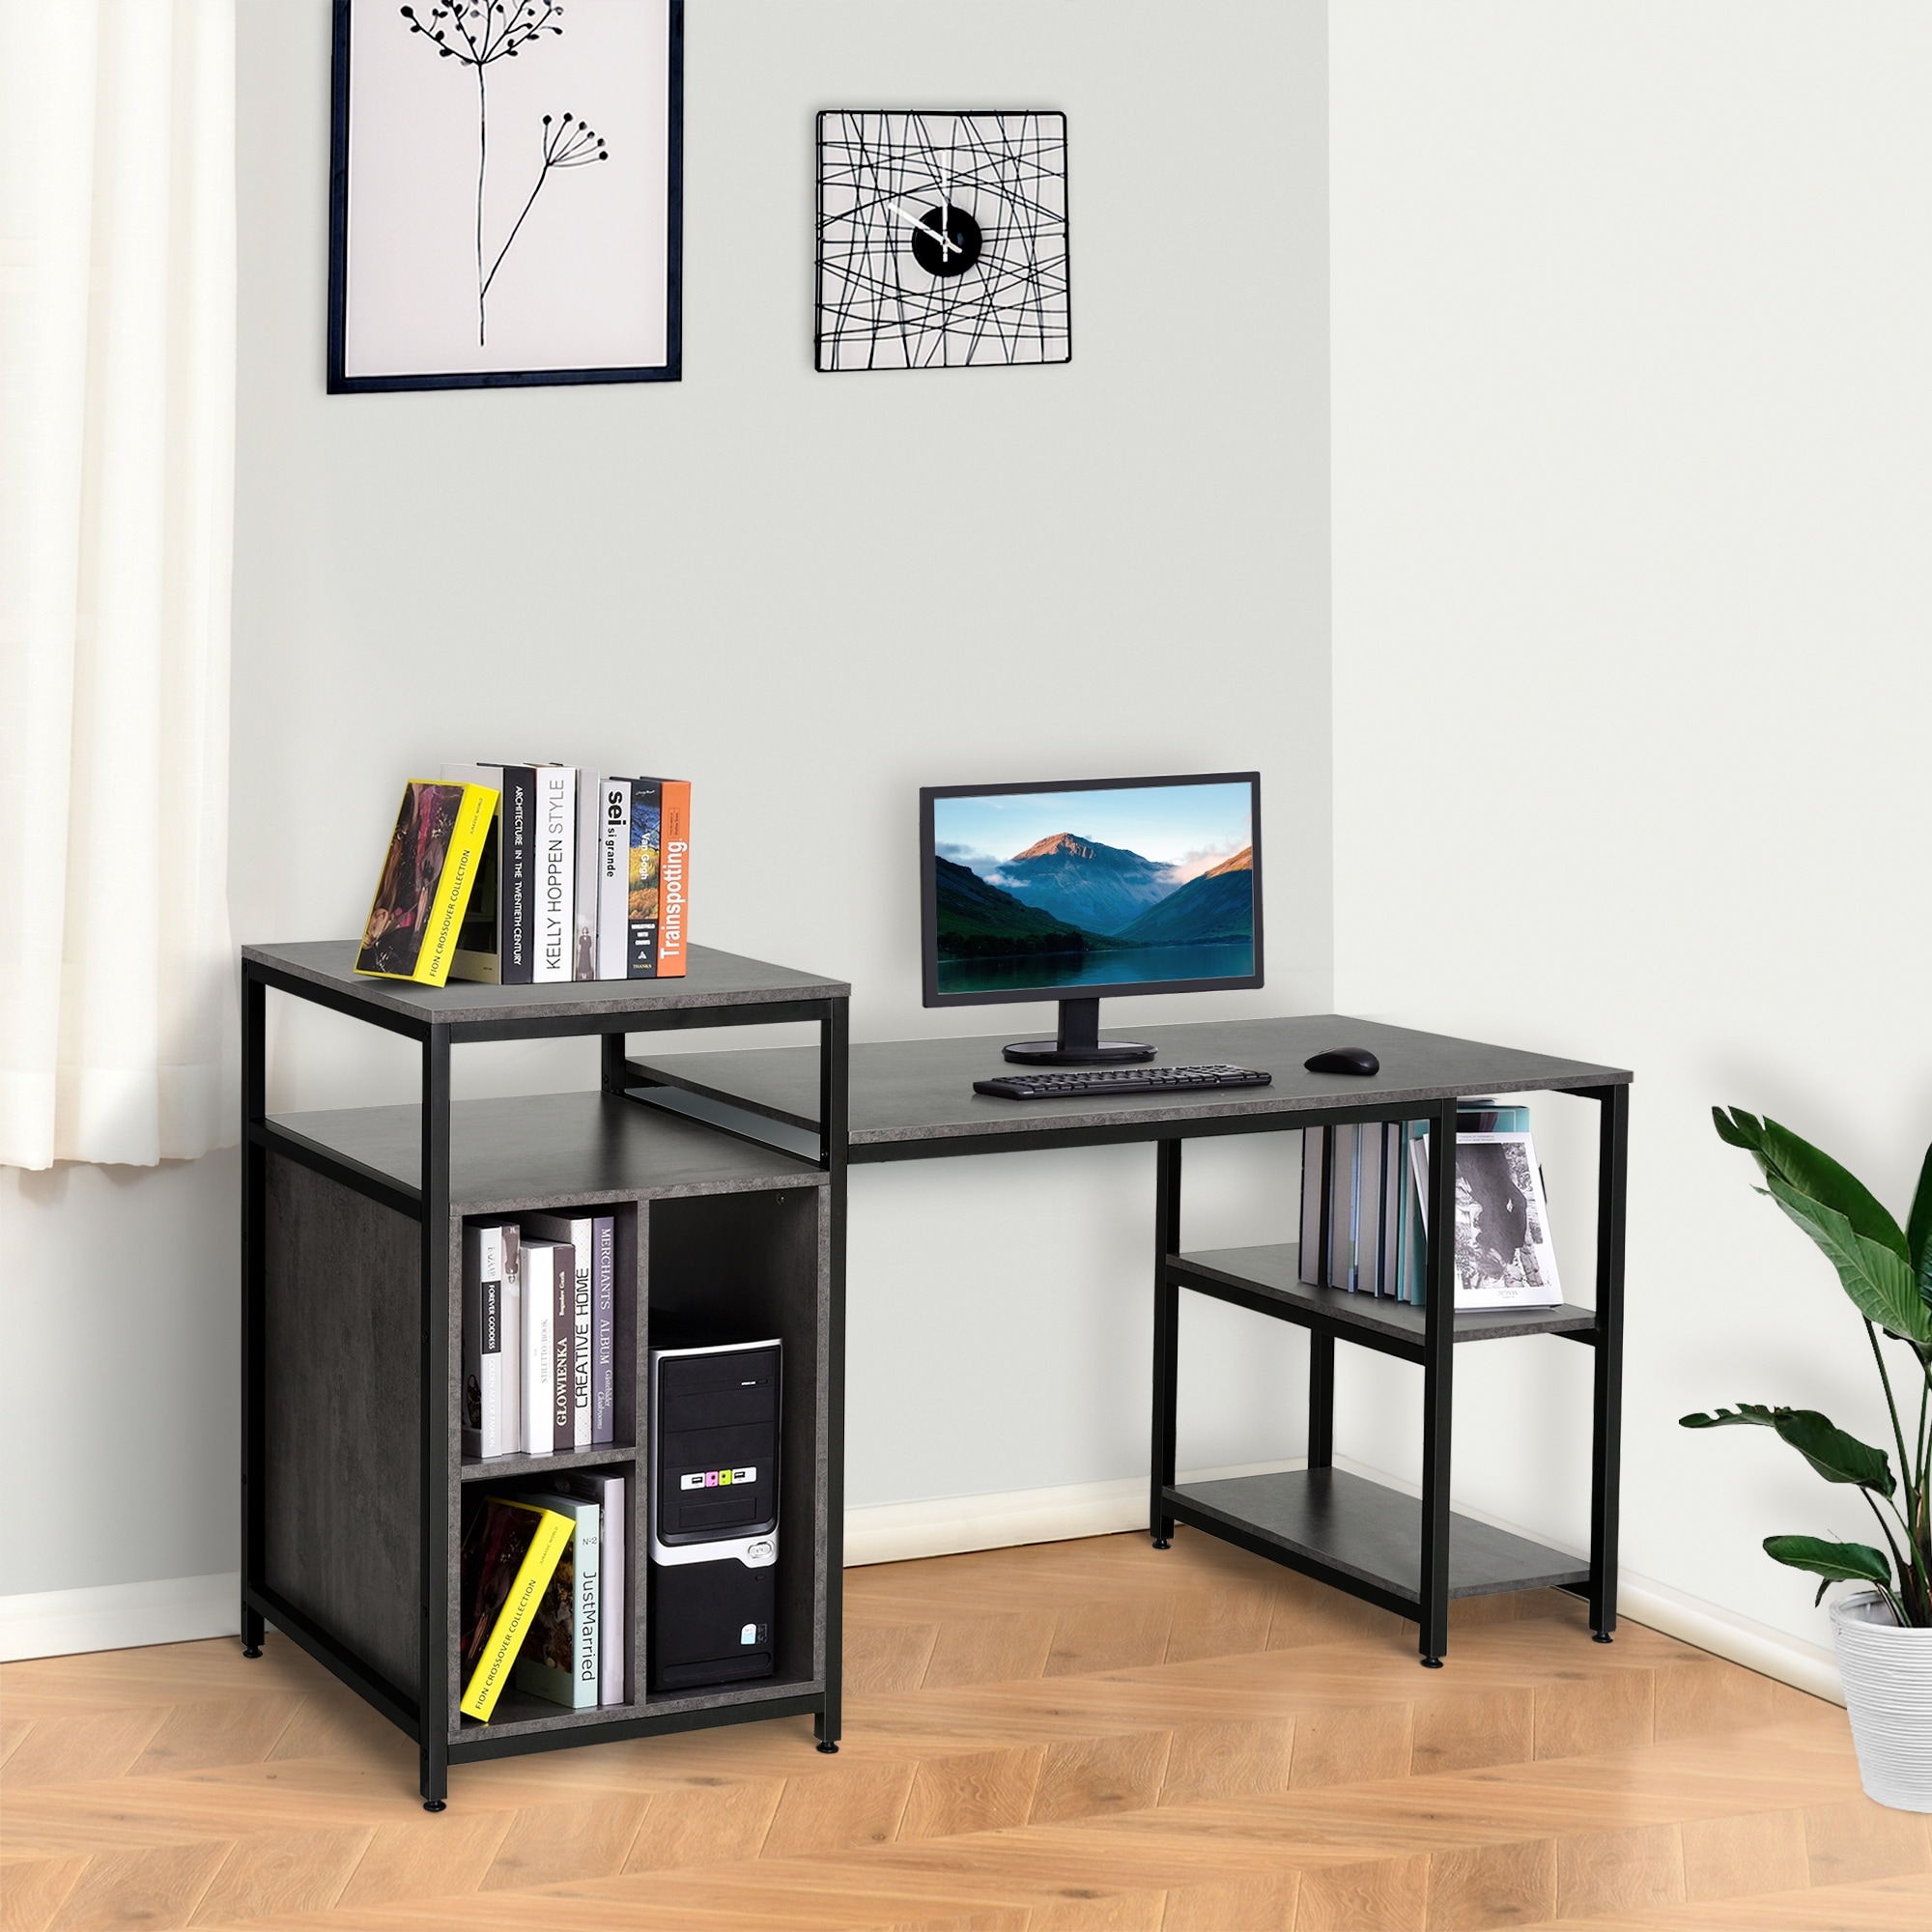 https://ak1.ostkcdn.com/images/products/is/images/direct/cbb5aabbfcb217d4e590fab10742befefec8f770/HOMCOM-68-Inch-Office-Table-Computer-Desk-Workstation-Bookshelf-with-CPU-Stand%2C-Spacious-Storage-Shelves-%26-Chic.jpg